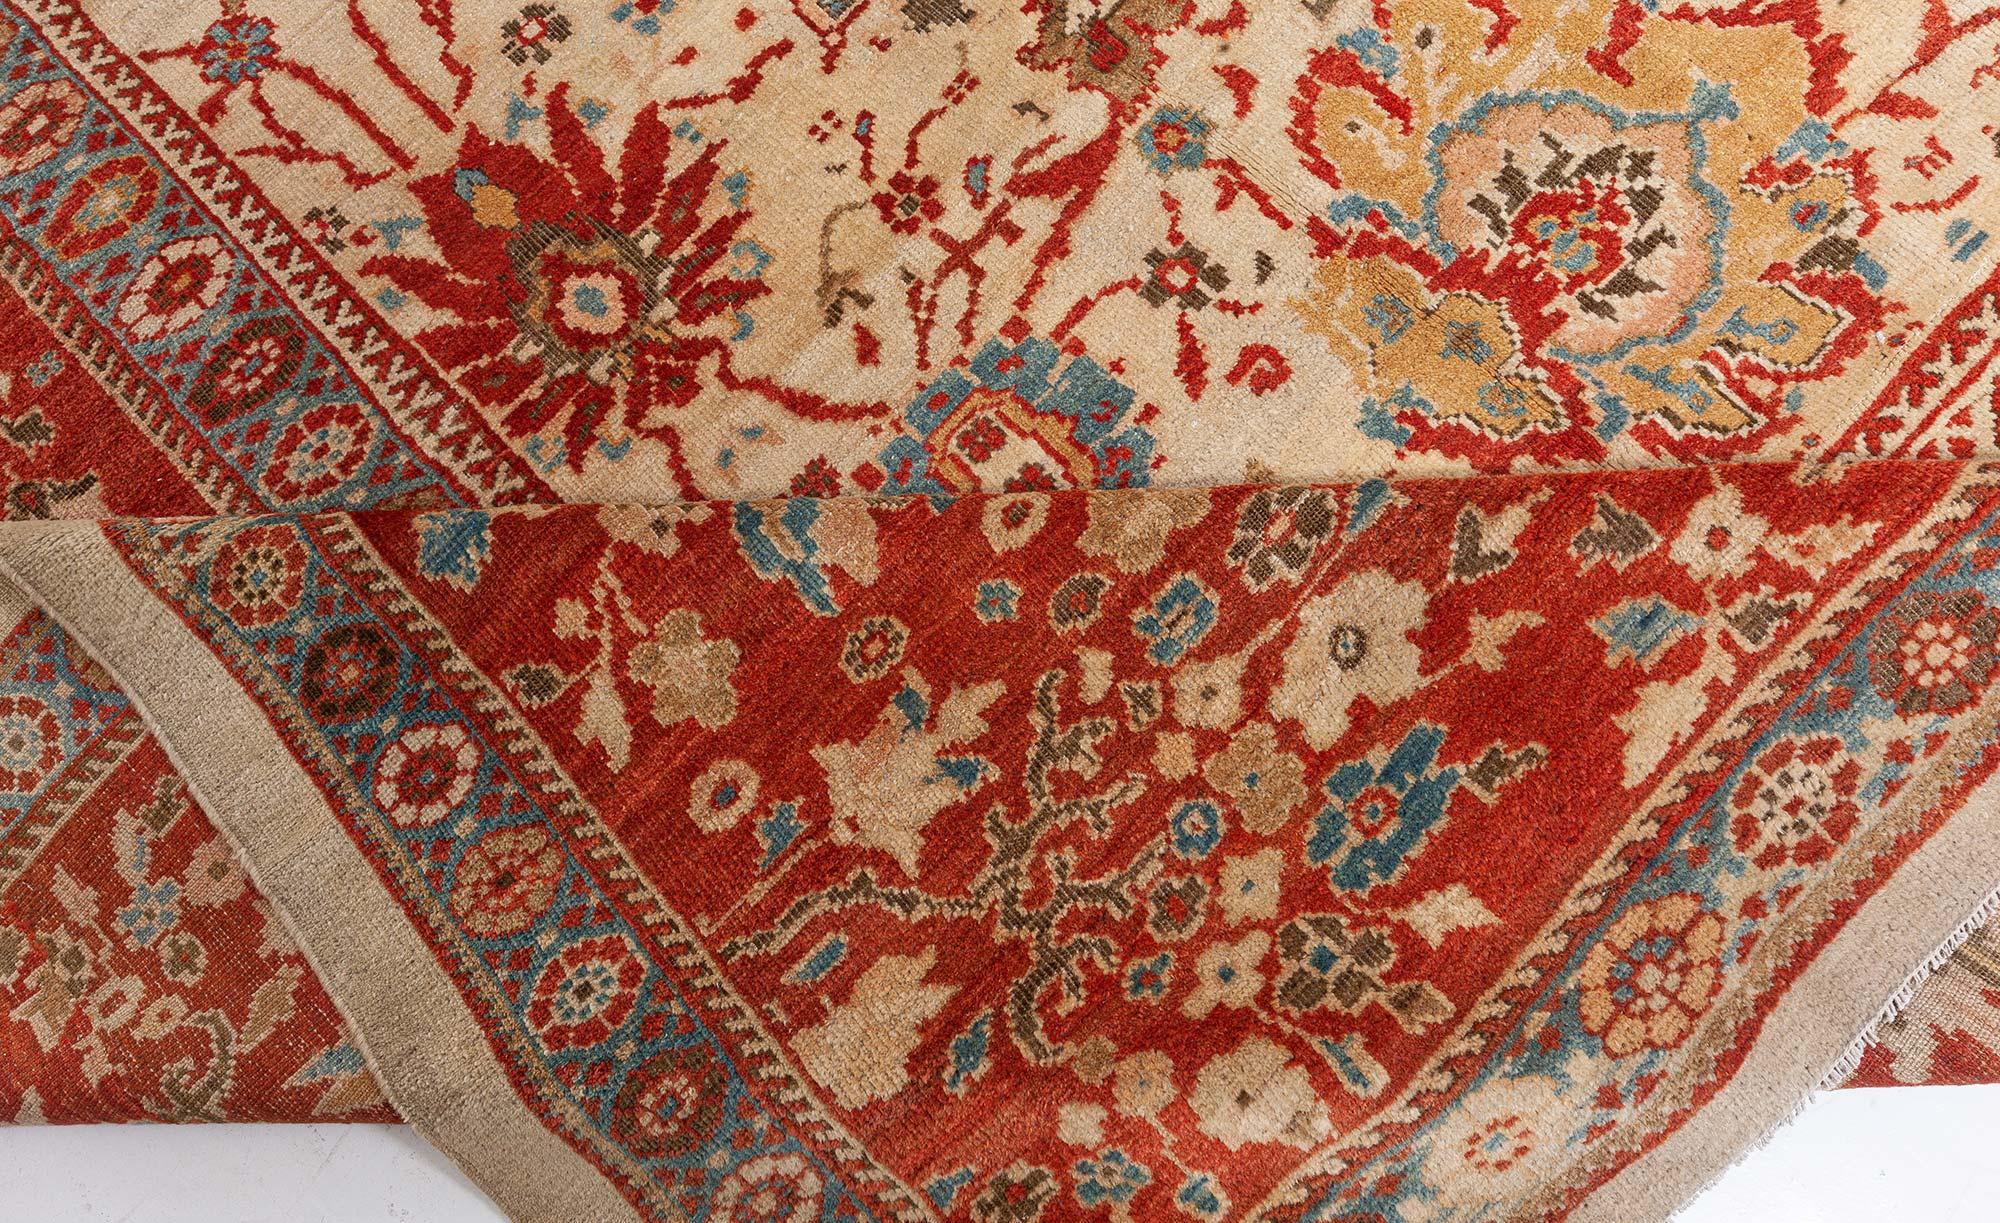  19th Century Persian Sultanabad Red Blue Beige Rug Size Adjusted For Sale 5